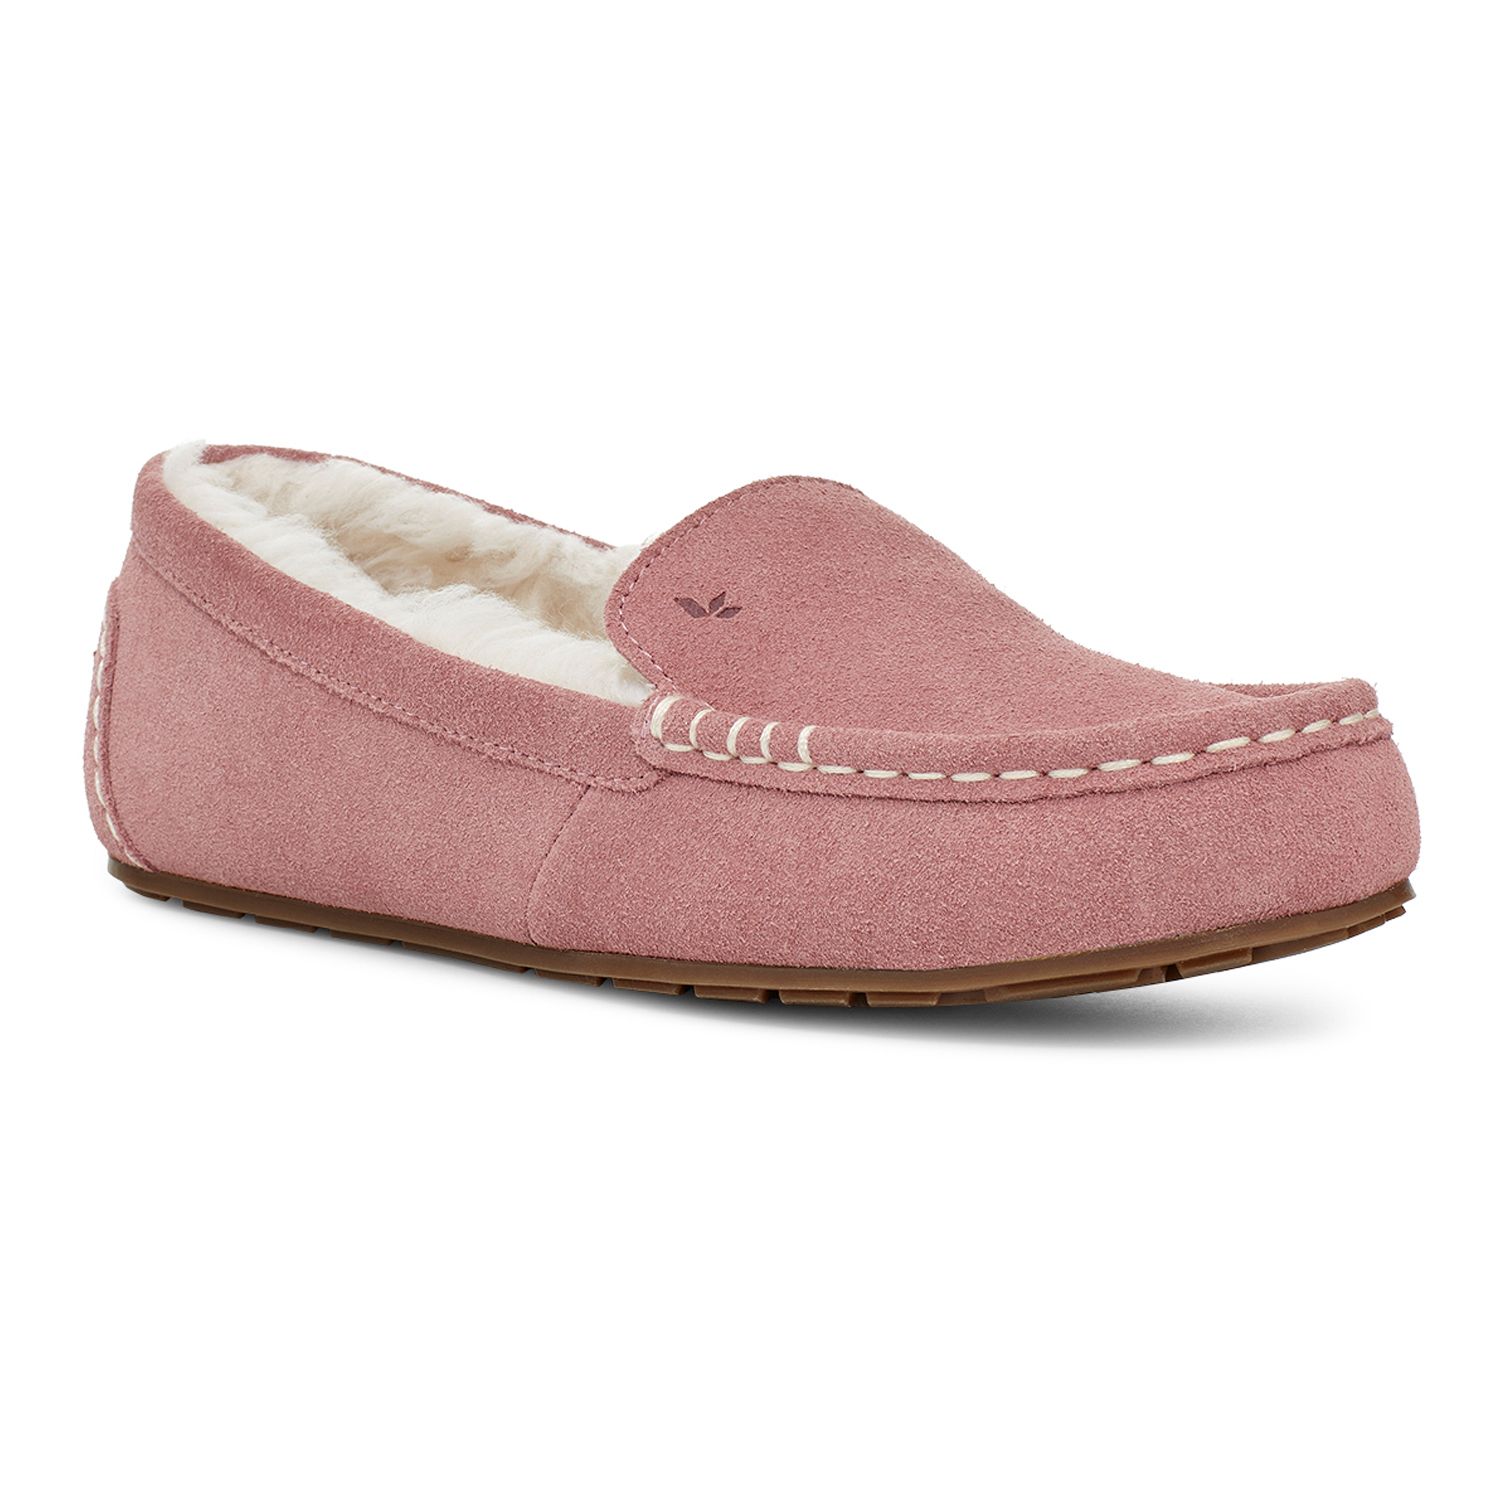 UGG Lezly Women's Suede Moccasin Slippers